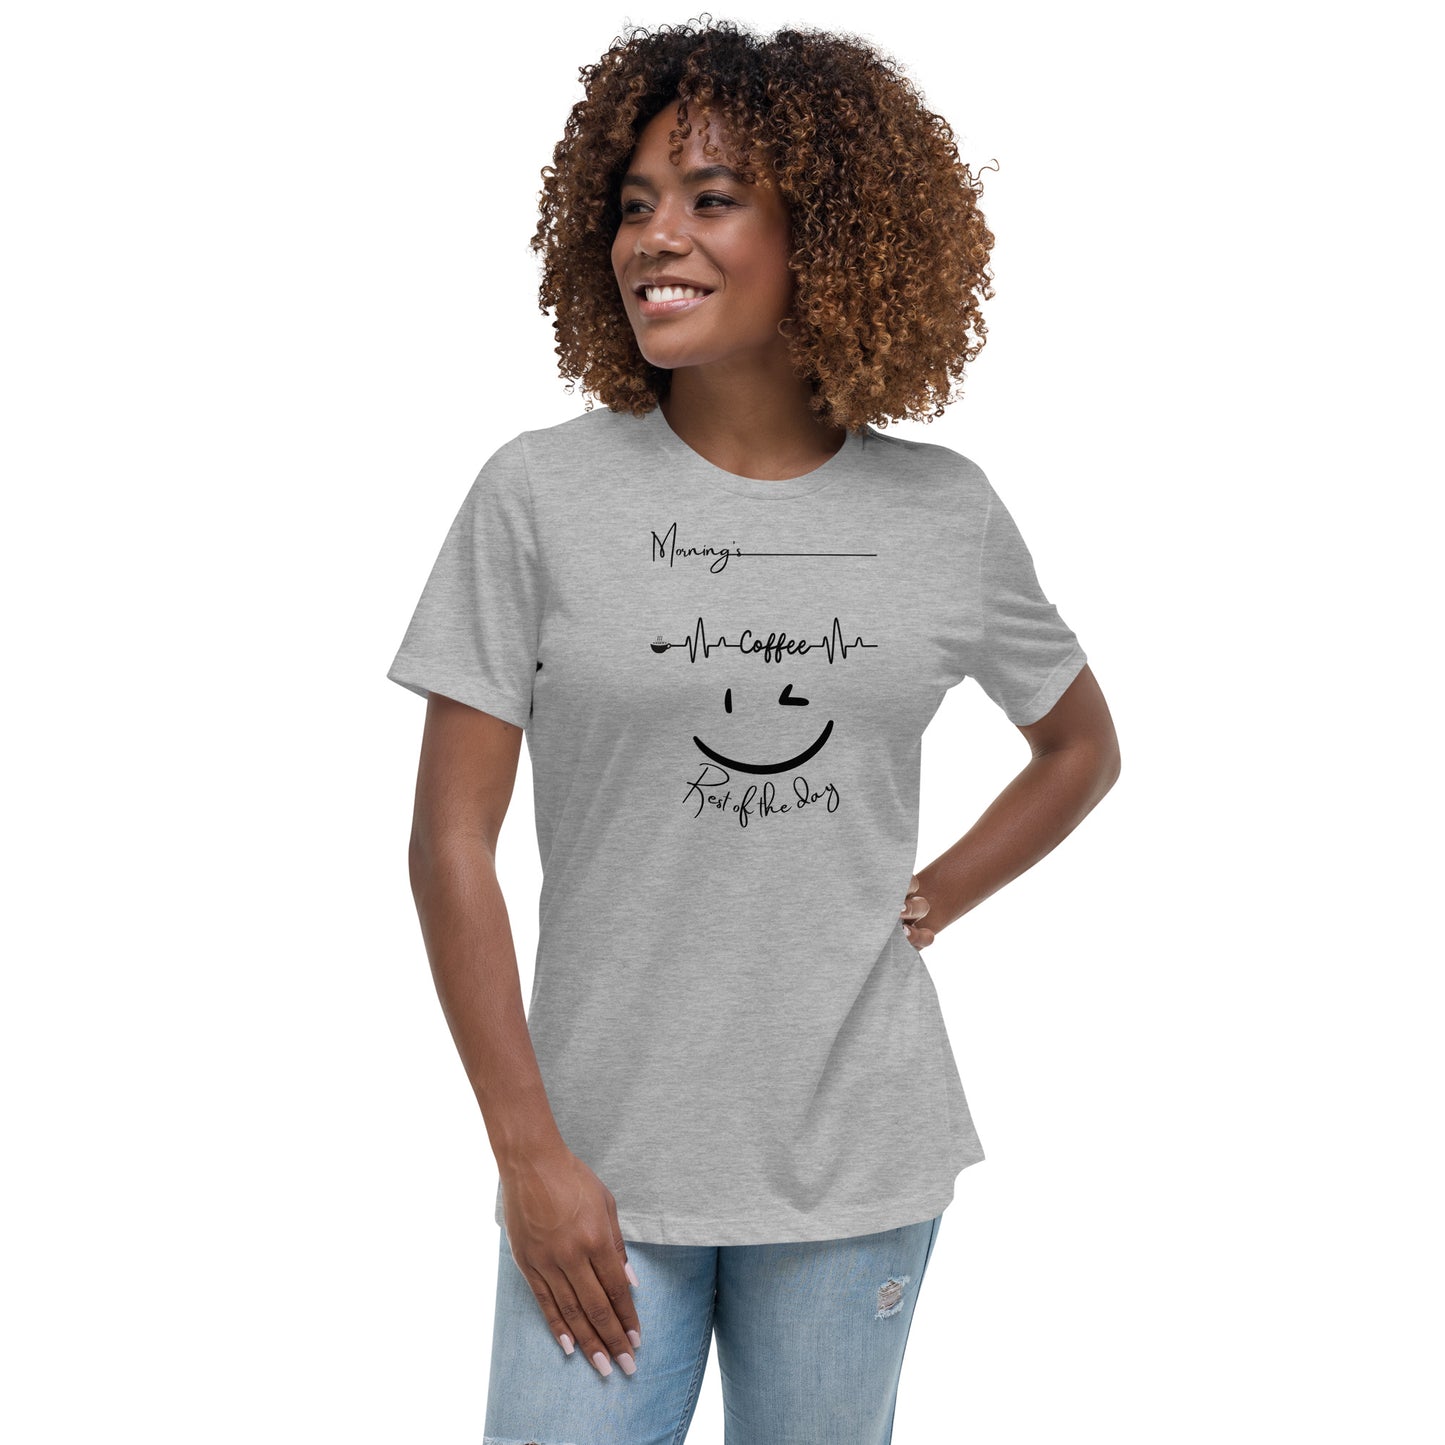 mornings, coffee, rest of the day Women's Relaxed T-Shirt